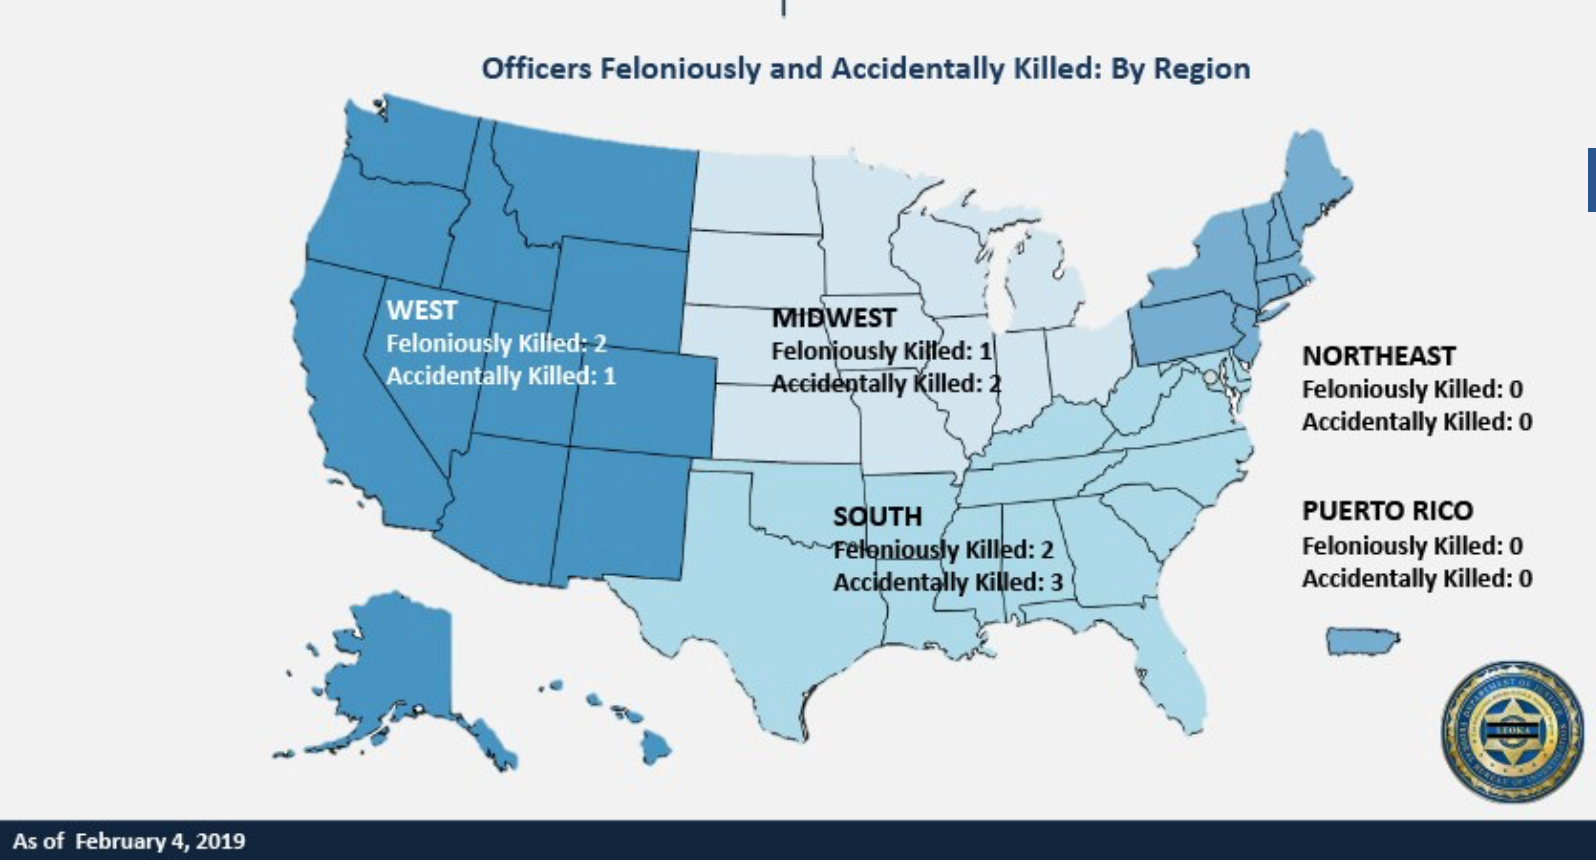 Color coded U.S . map broken into West, Midwest, South and Northeast, detailing officer deaths in each region.